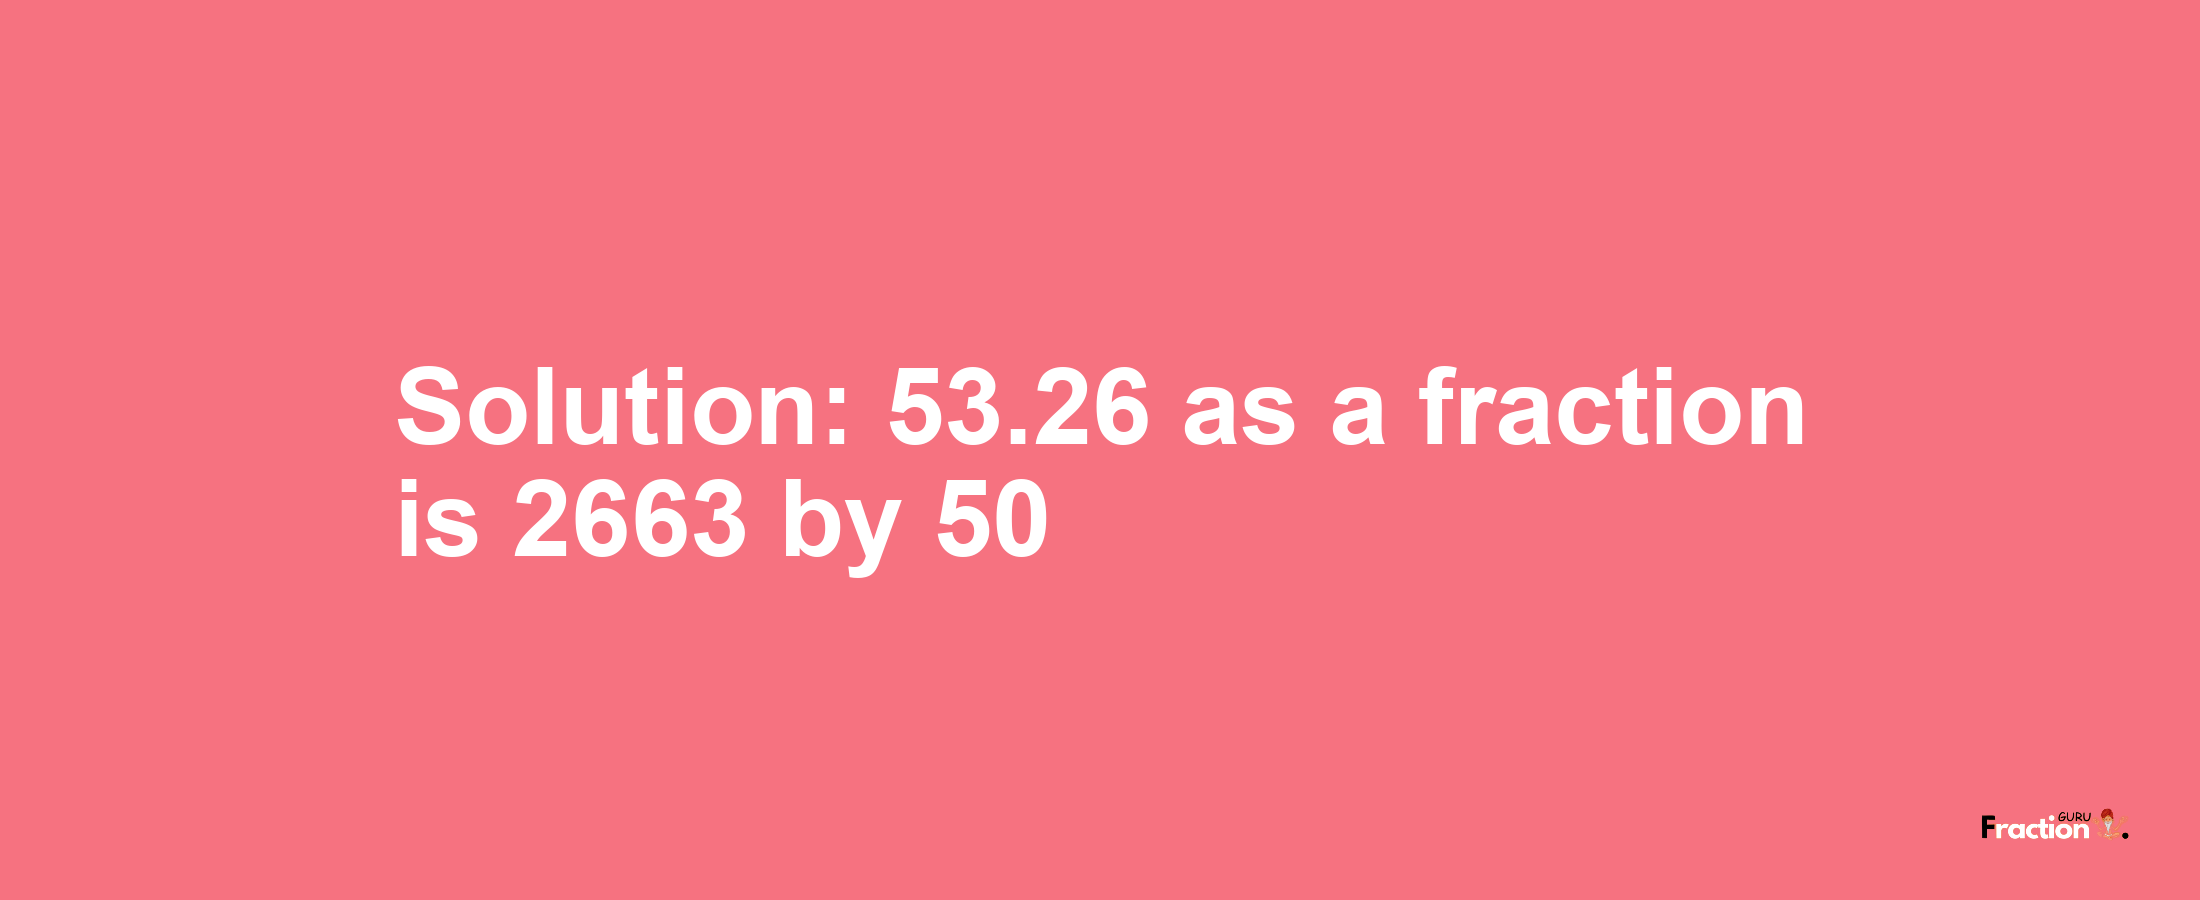 Solution:53.26 as a fraction is 2663/50